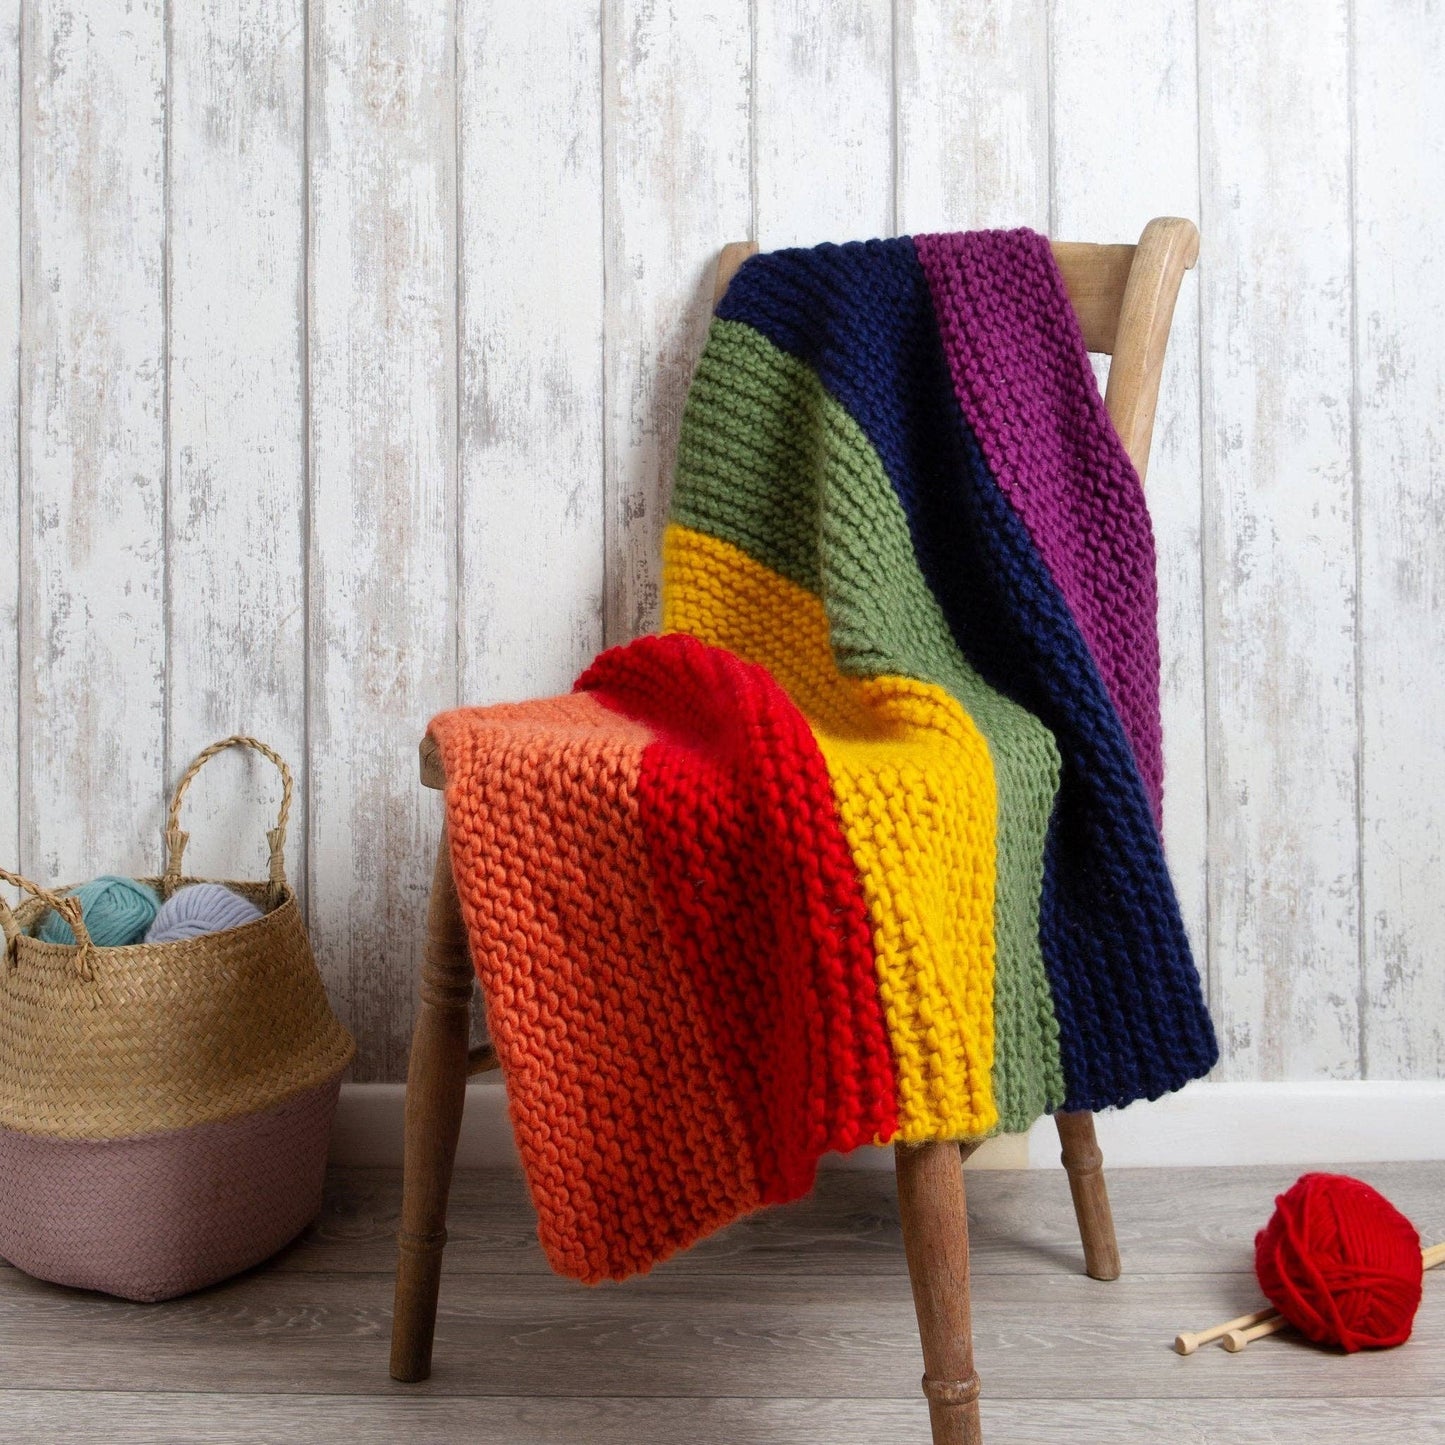 Wool Couture Company - Rainbow Blanket Knitting Kit Bright